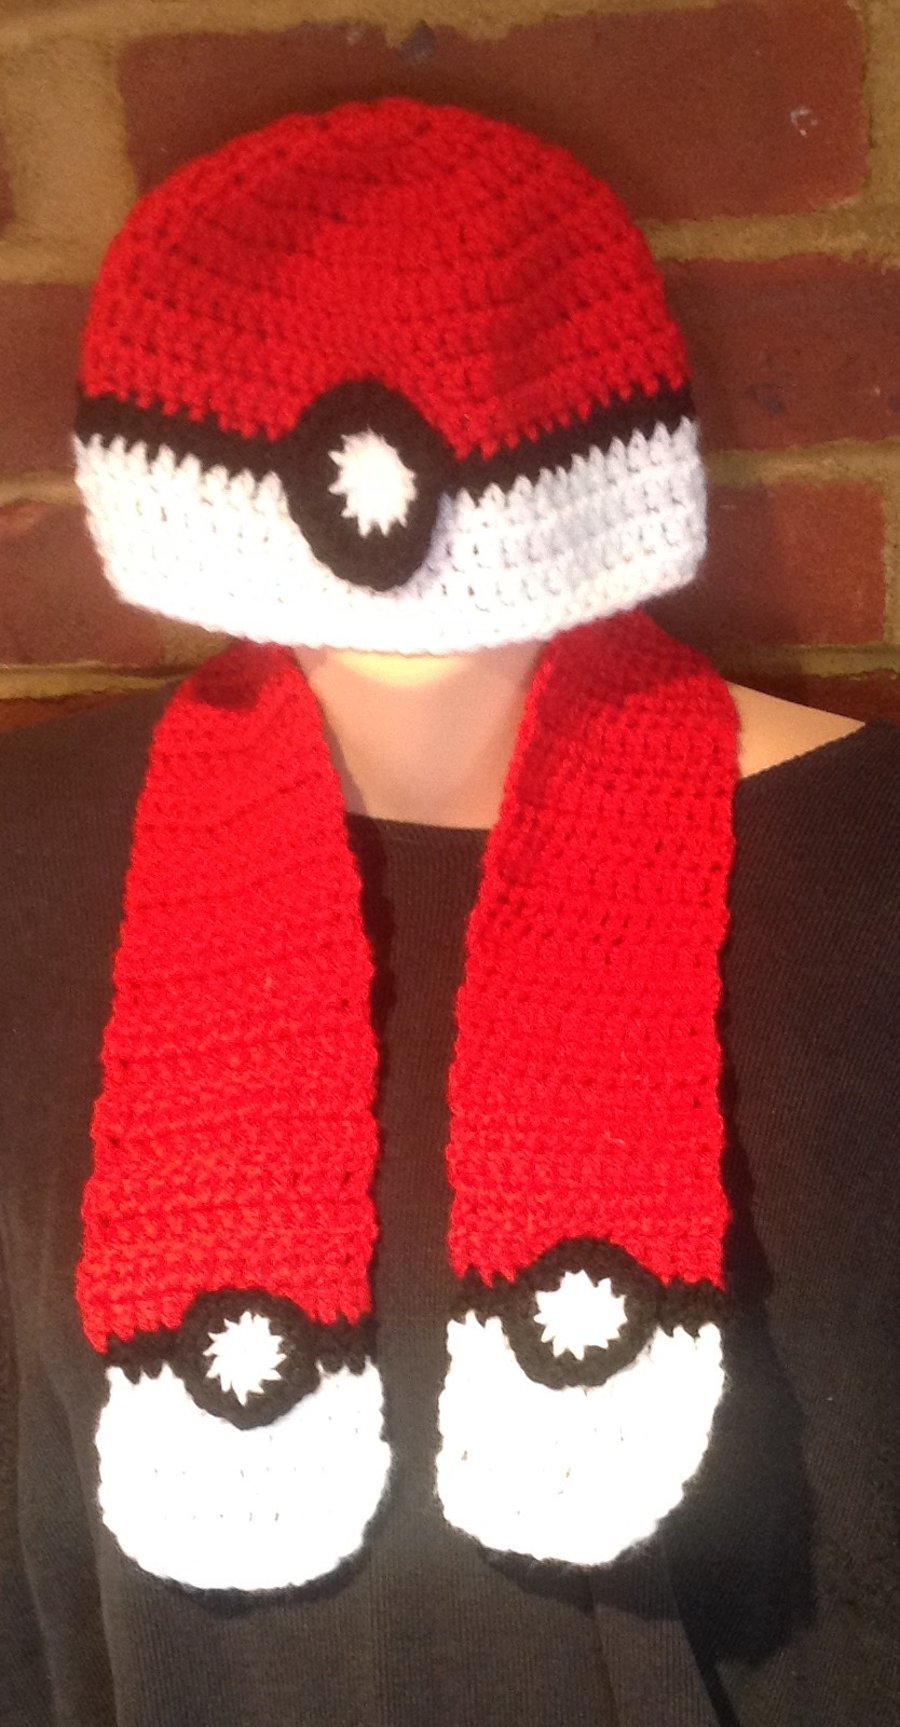 Hat and scarf set